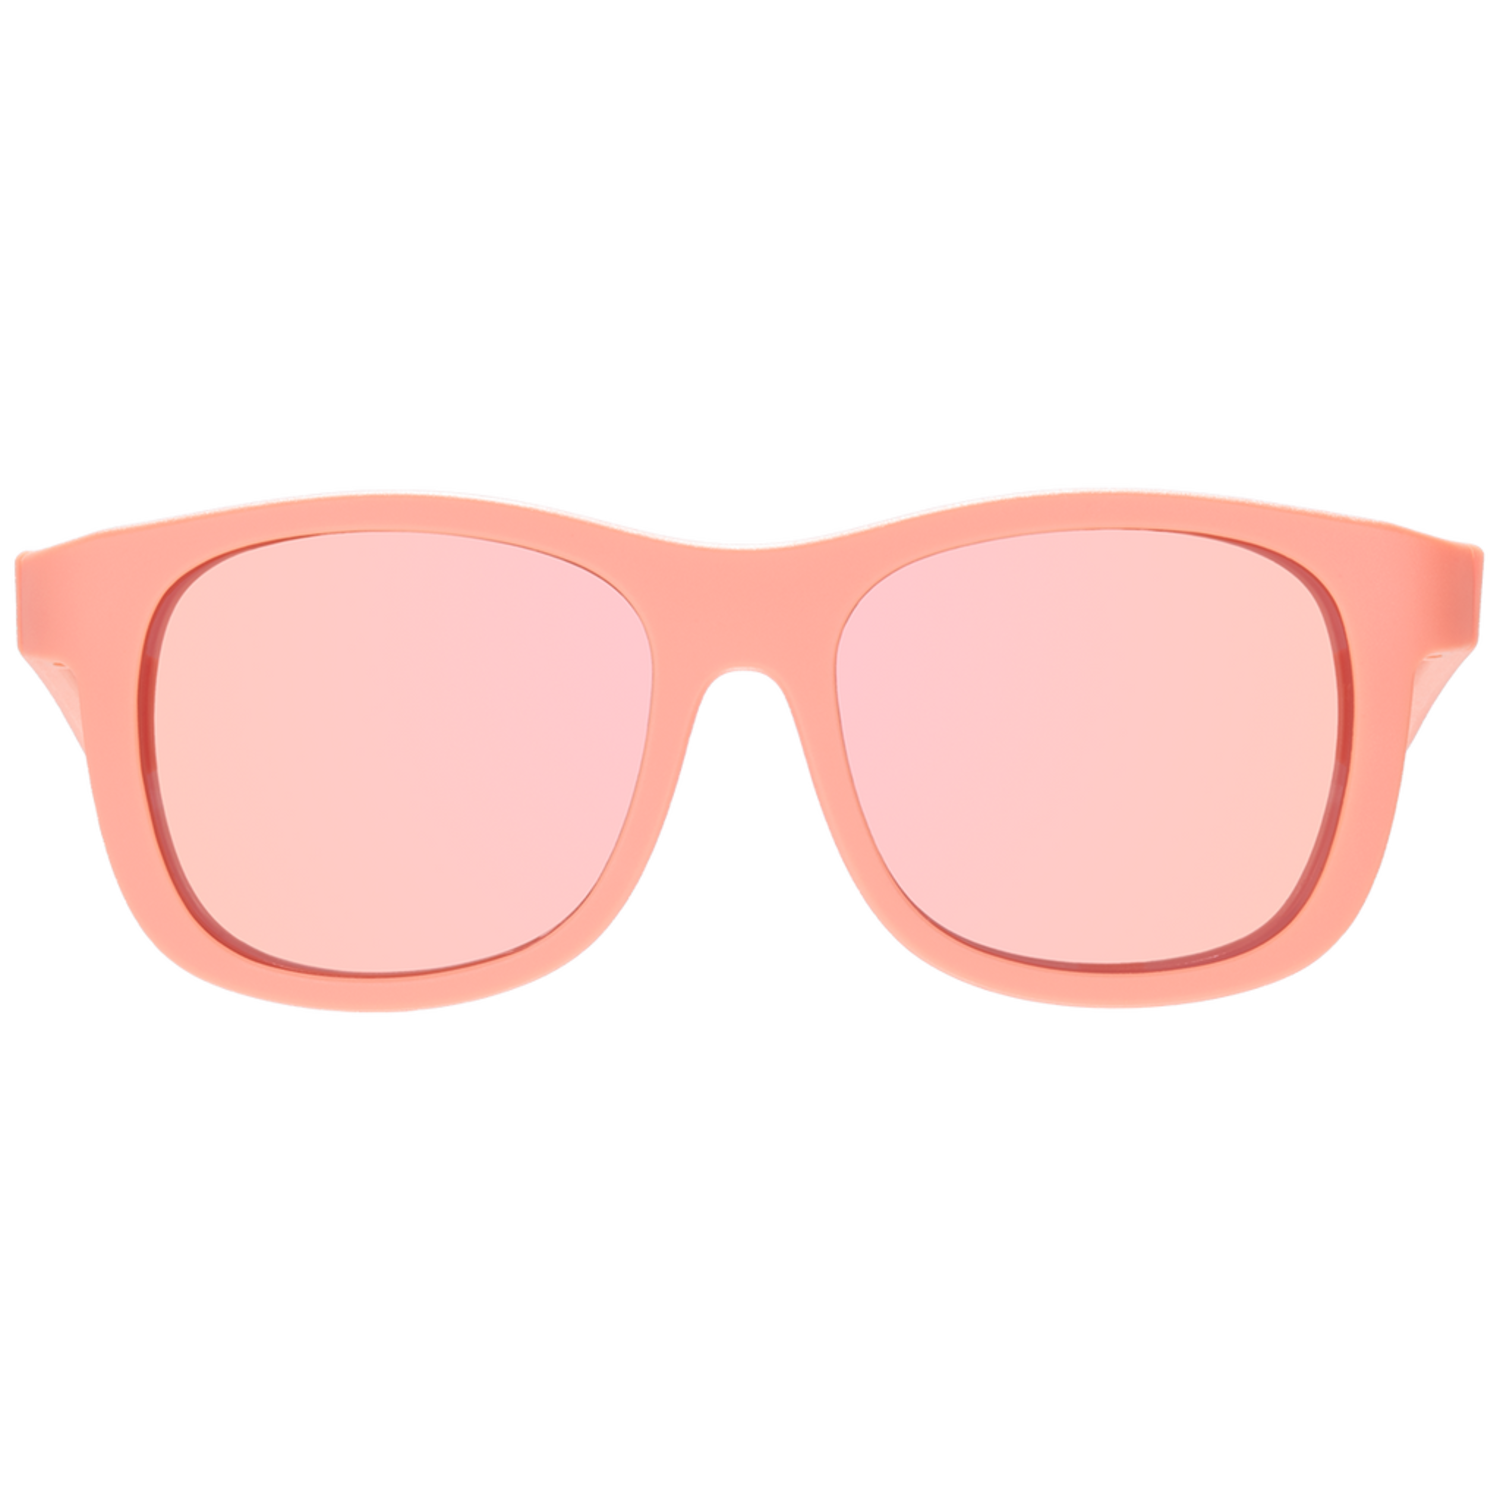 Yellow Sunglasses Polarized | Recycled Plastic | Waxhead Snapper Pink